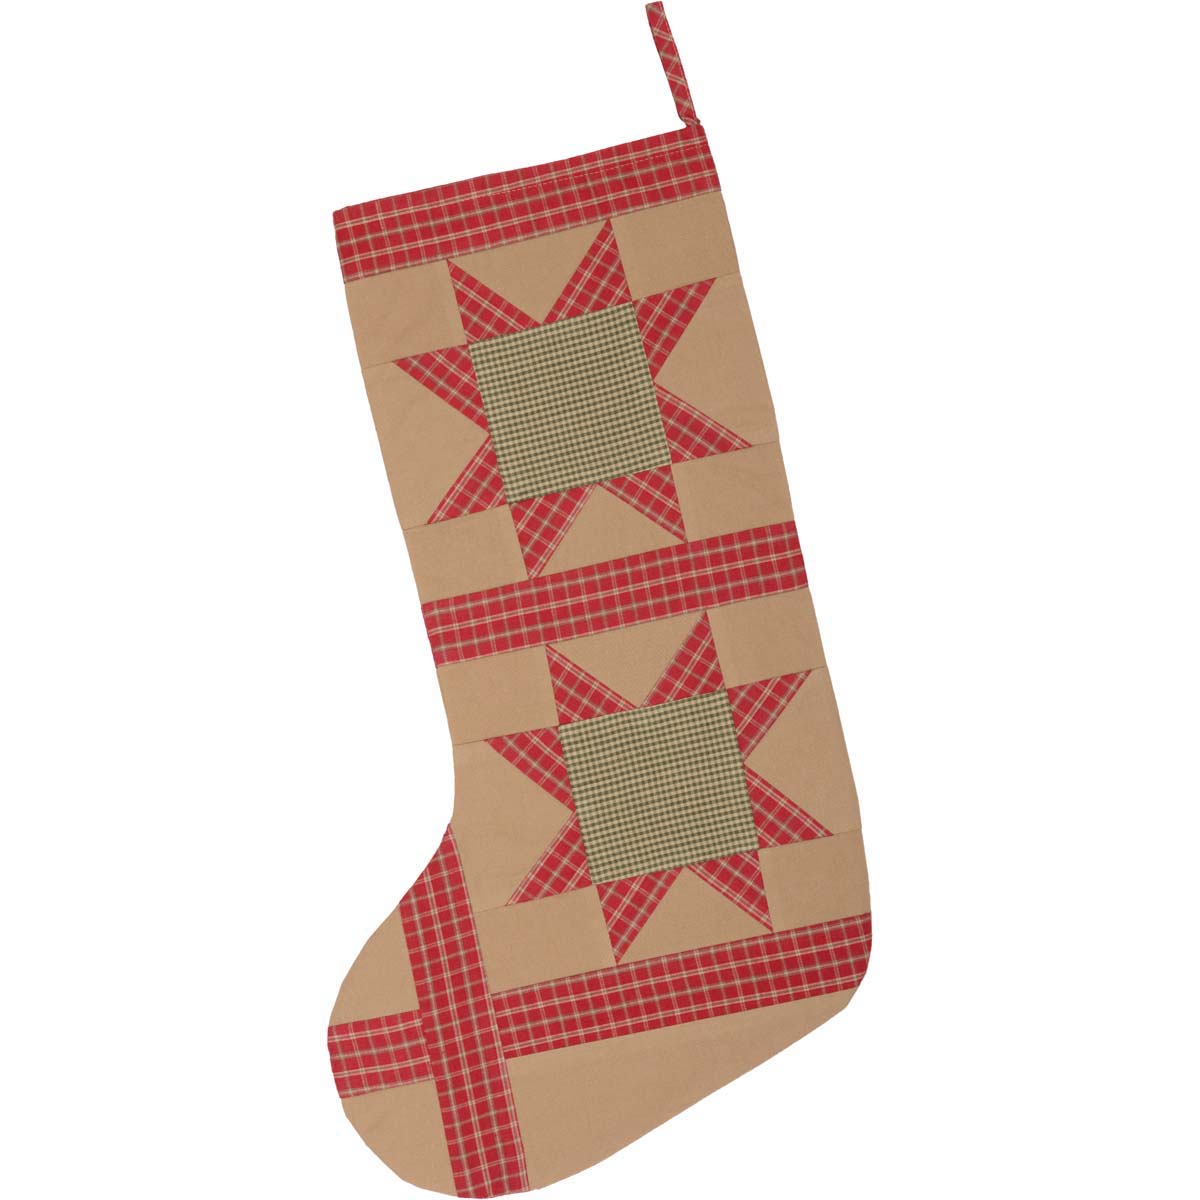 42479-Dolly-Star-Tan-Patch-Stocking-12x20-image-4